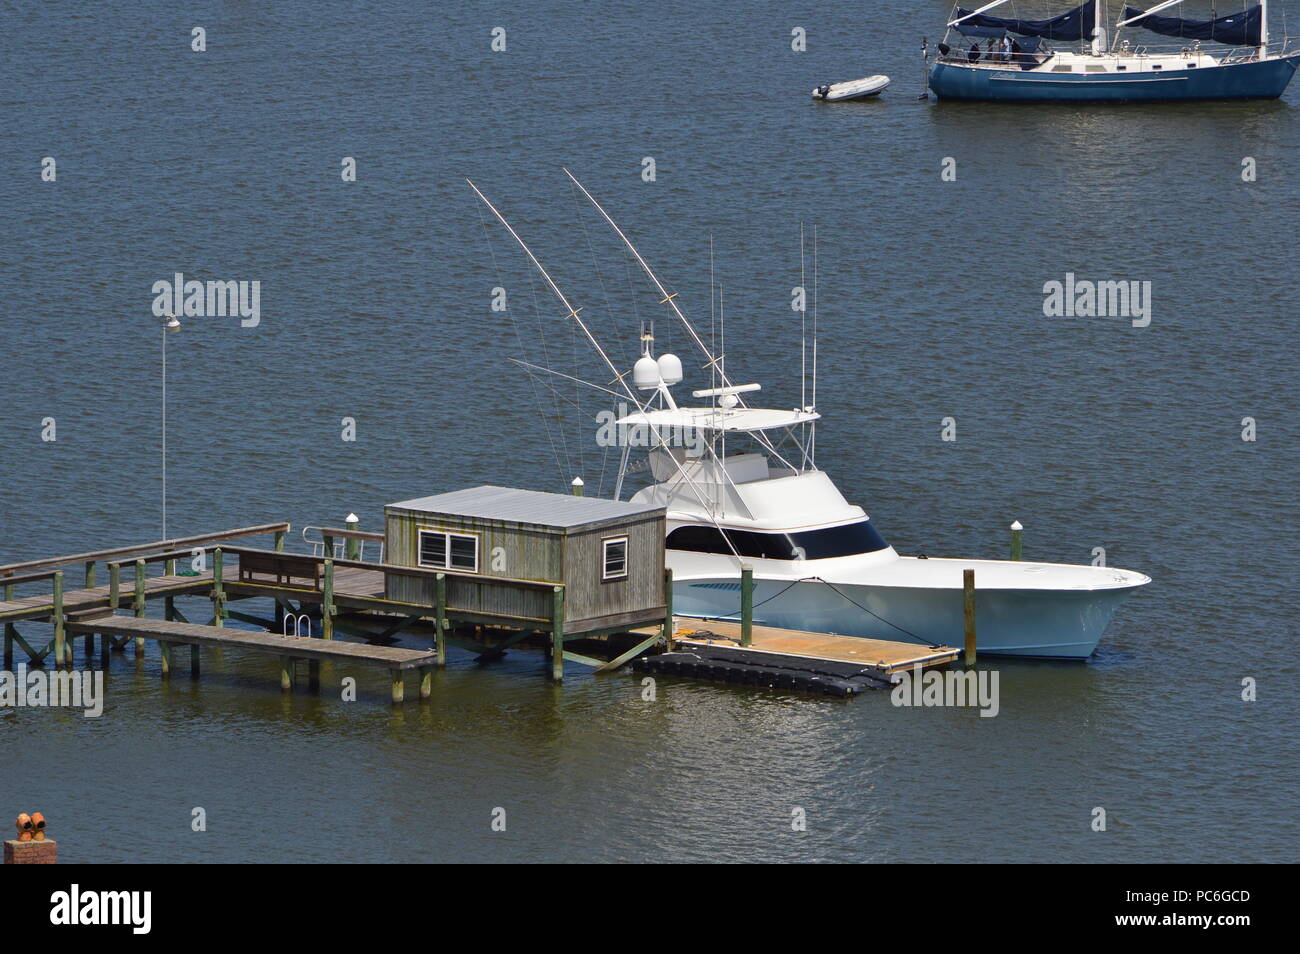 Coastal Living Blue and White Boat Docked at Pier on Calm Florida Water Stock Photo